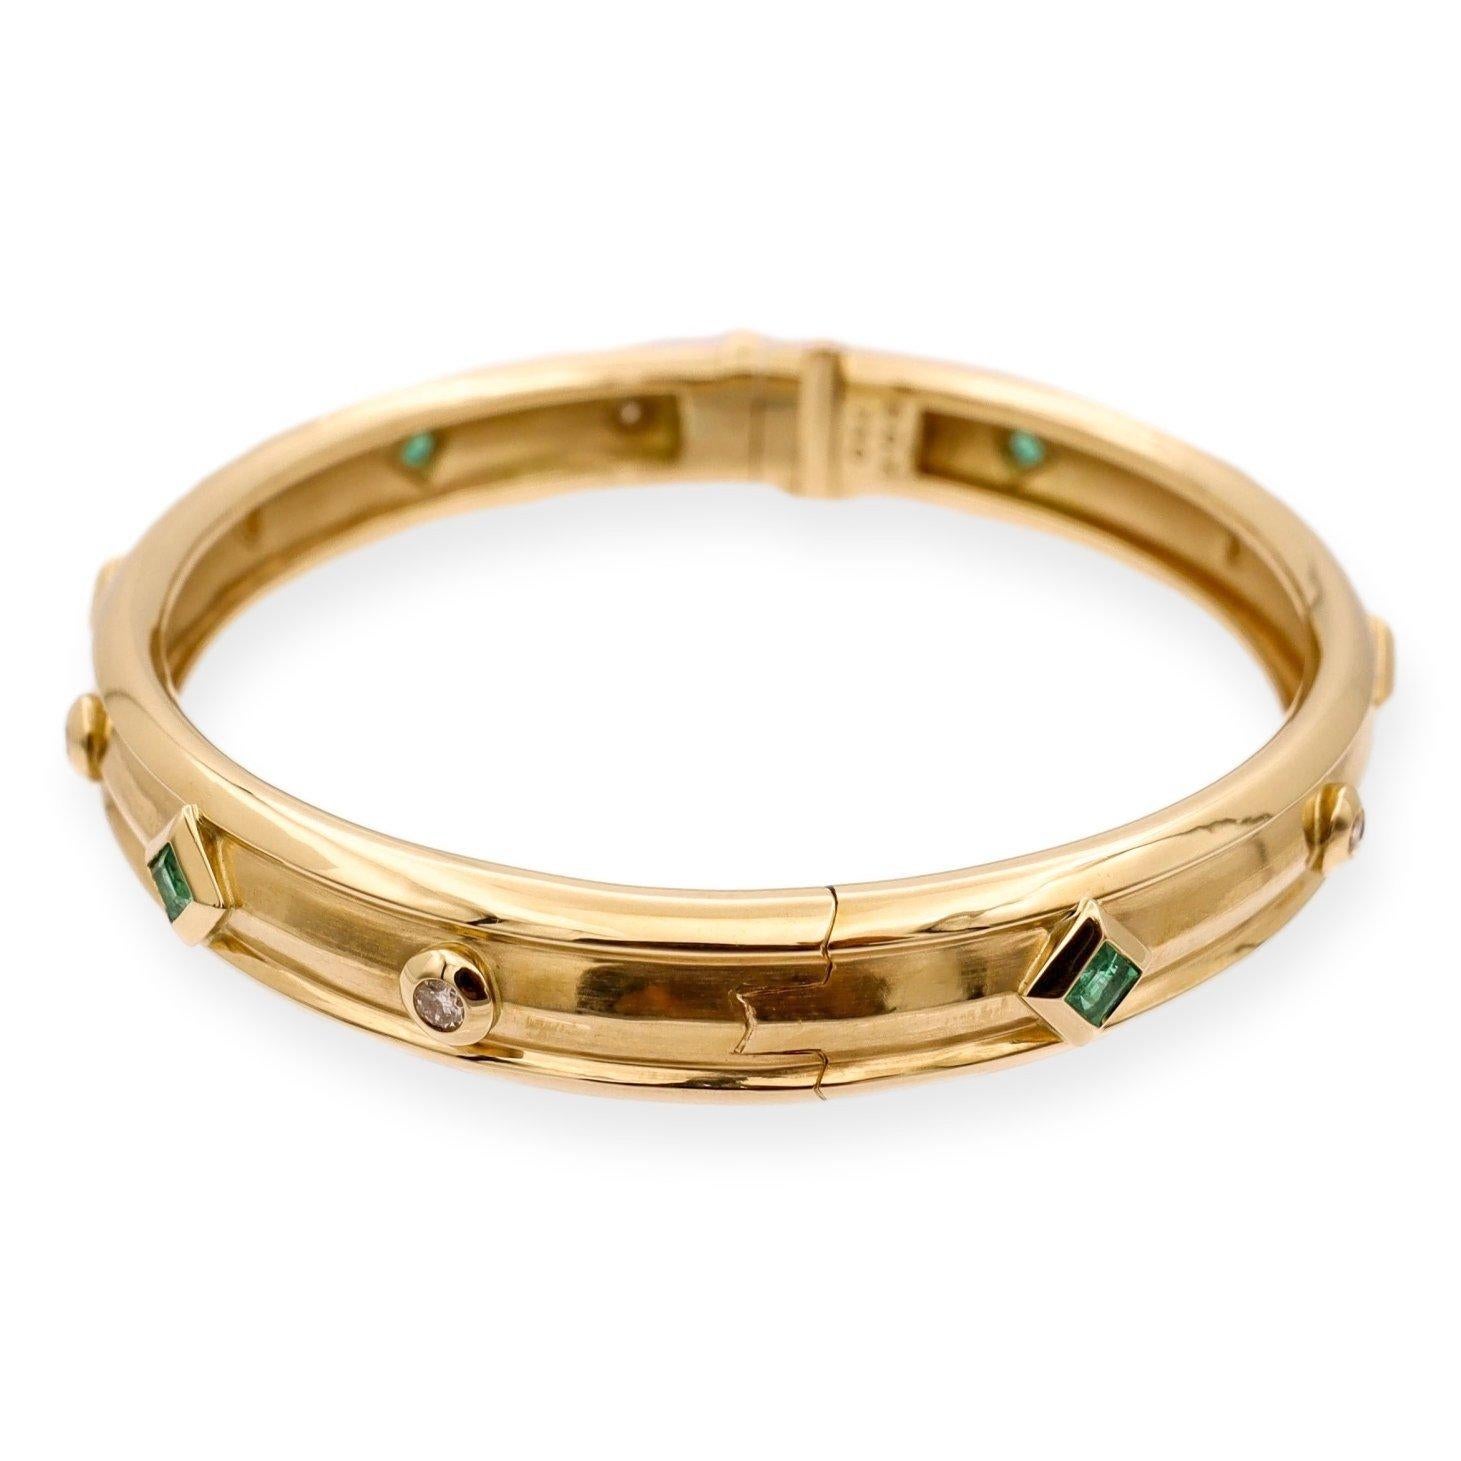 David Yurman bracelet from the Modern Renaissance collection finely crafted in 18 karat yellow gold featuring 6 square emeralds weighing 0.60 carats total weight and 6 round brilliant cut diamonds weighing 0.18 carats total weight interlocking all